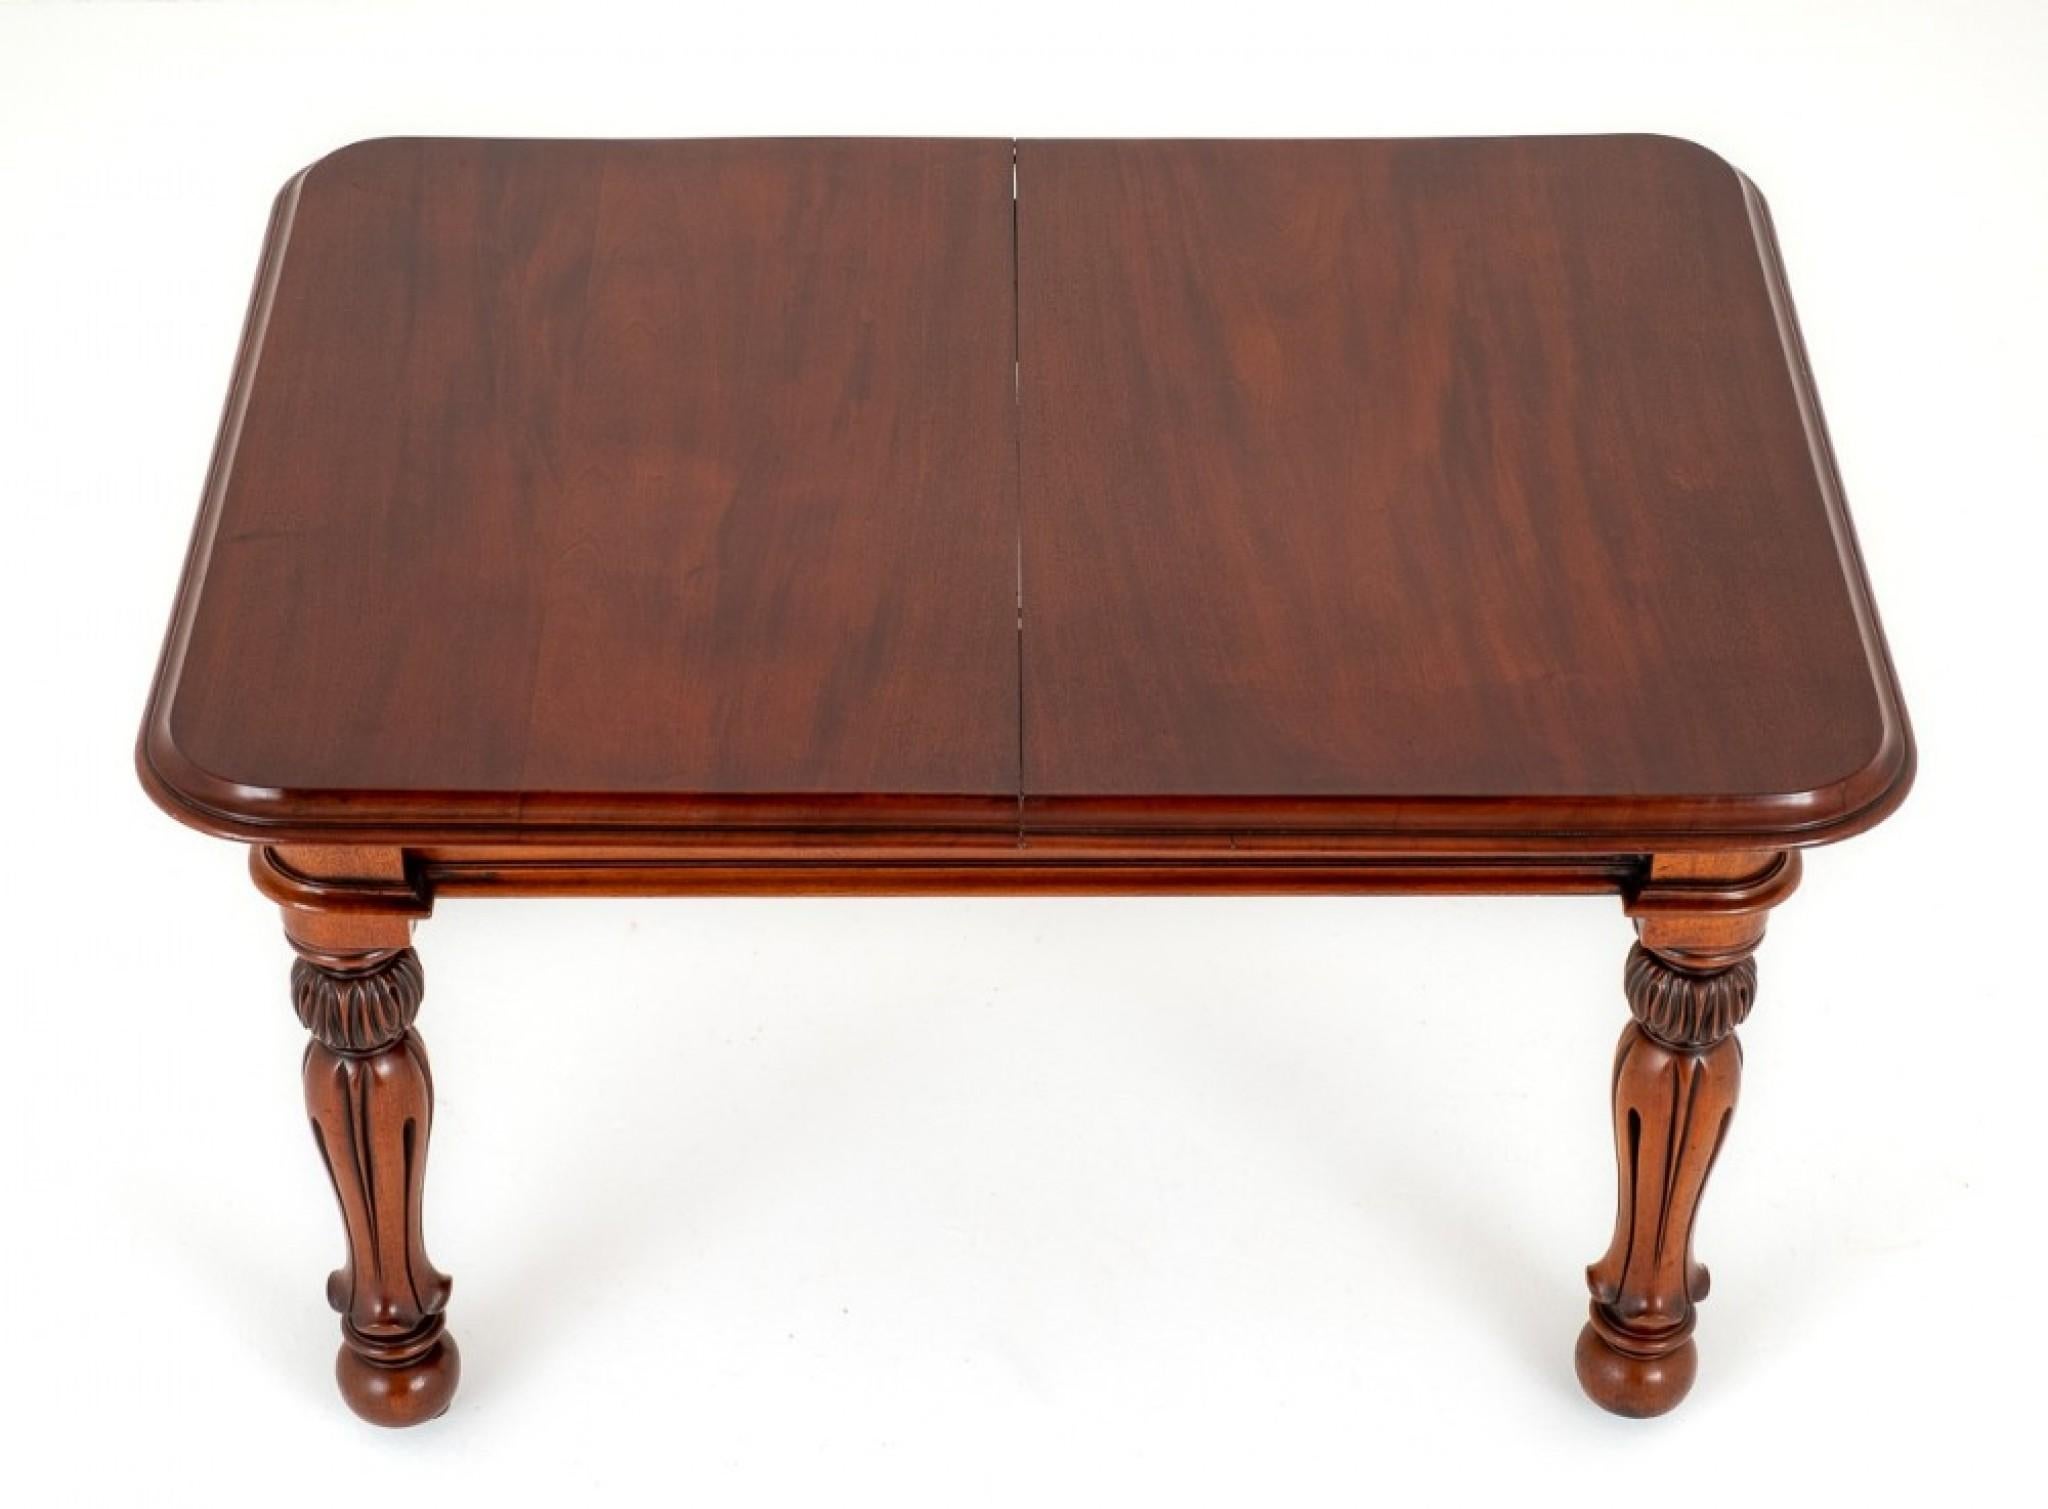 Mid-19th Century Victorian Dining Table Extending 2 Leaf Mahogany 1860 For Sale